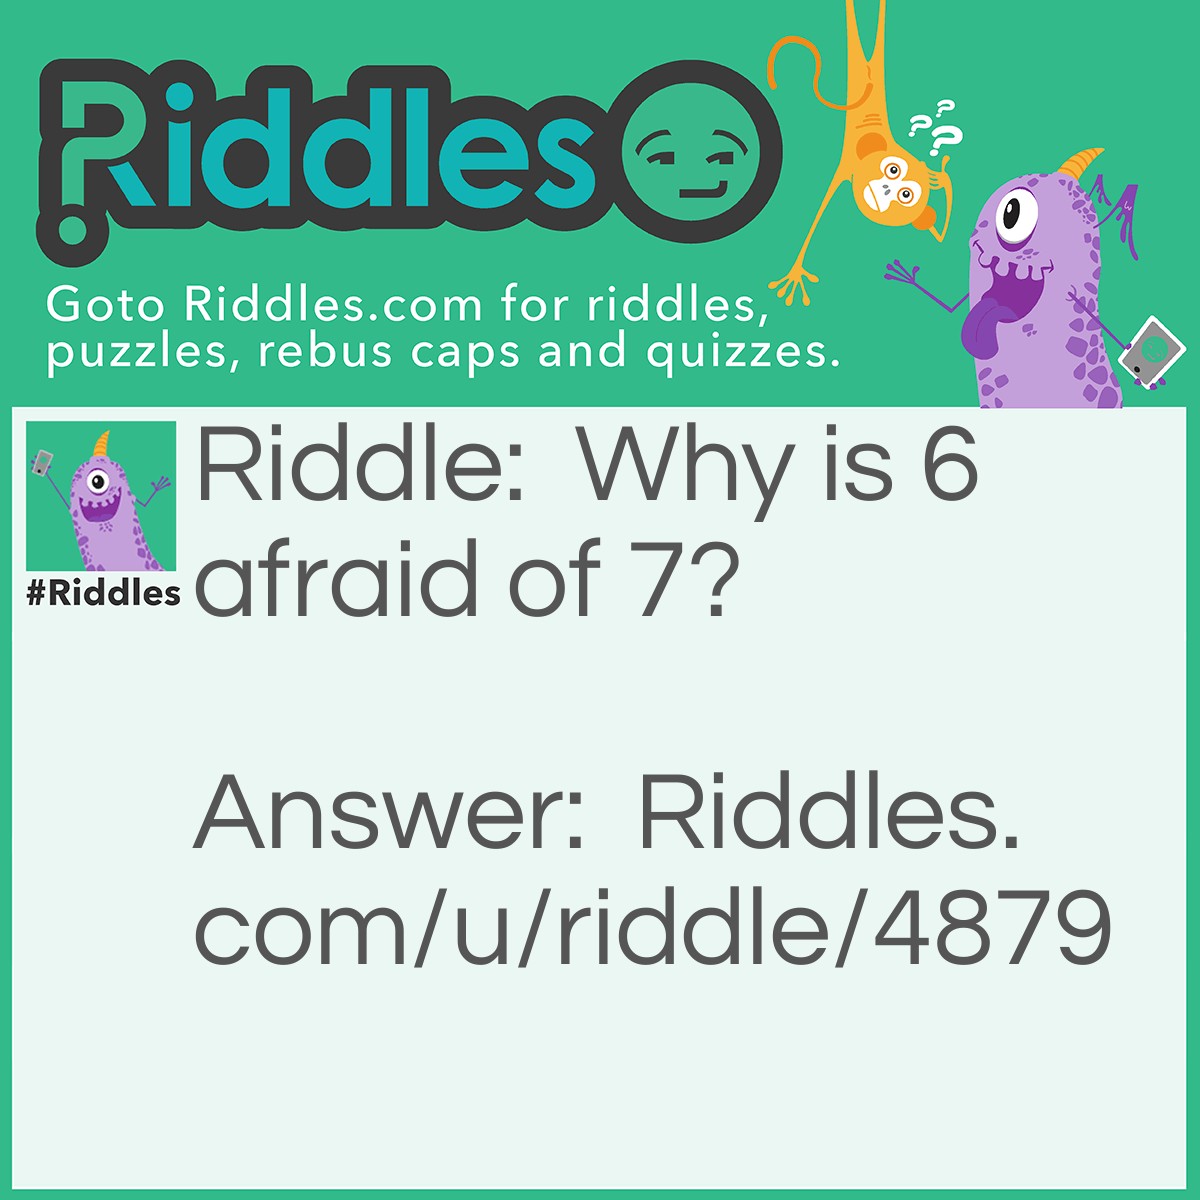 Riddle: Why is 6 afraid of 7? Answer: Because 7 ate 9 (7,8,9).